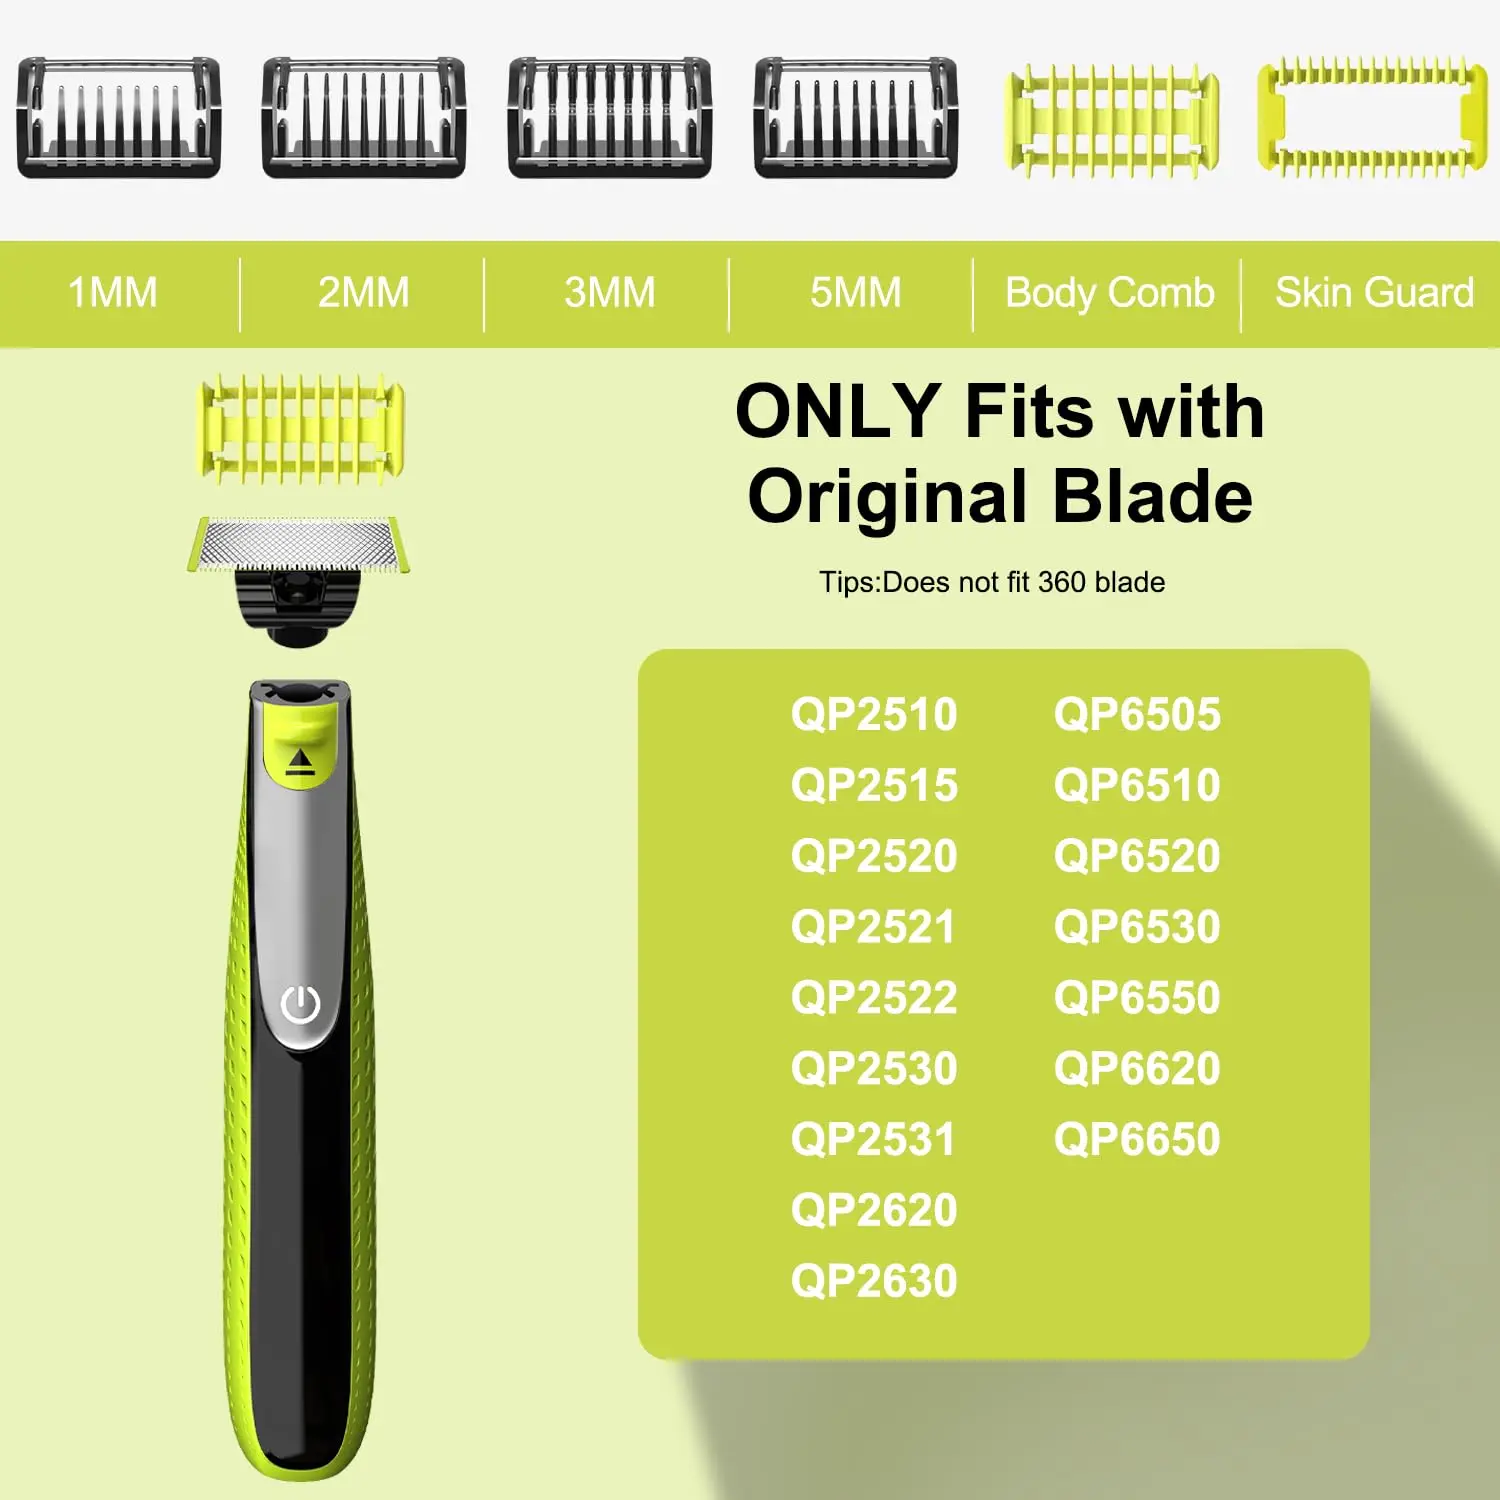 1-13 Pcs Shaver Replacement Blade for Philips OneBlade & One Blade Pro QP2520 QP2530 QP2620 QP2630 QP6510 QP6520 Beard Trimmer